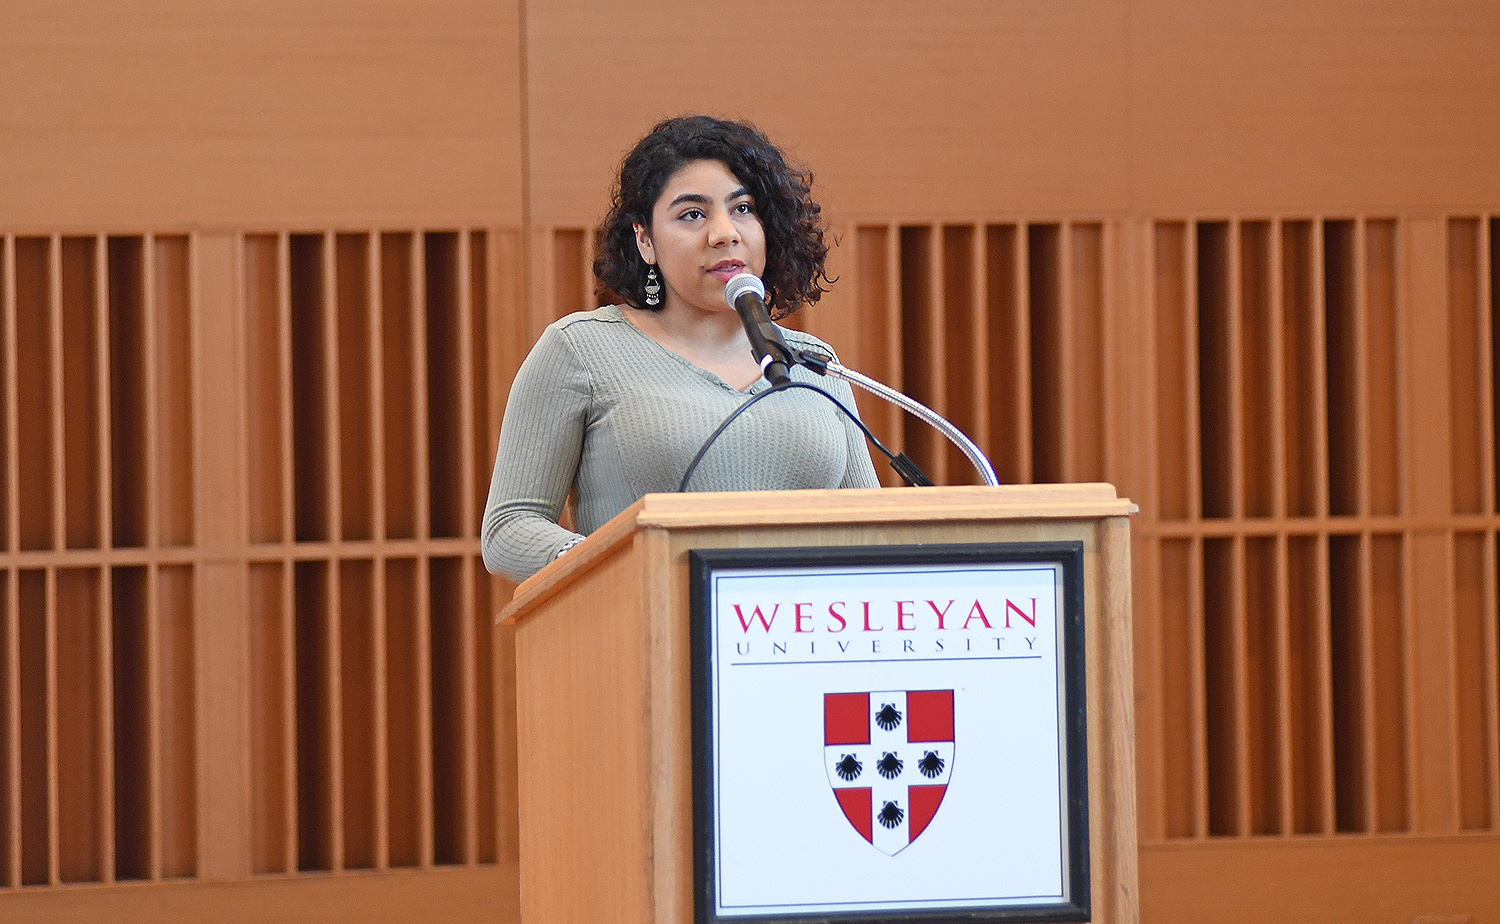 Natasha Guandique '20, presented an excerpt from King's baccalaureate address at Wesleyan on June 7, 1964. 